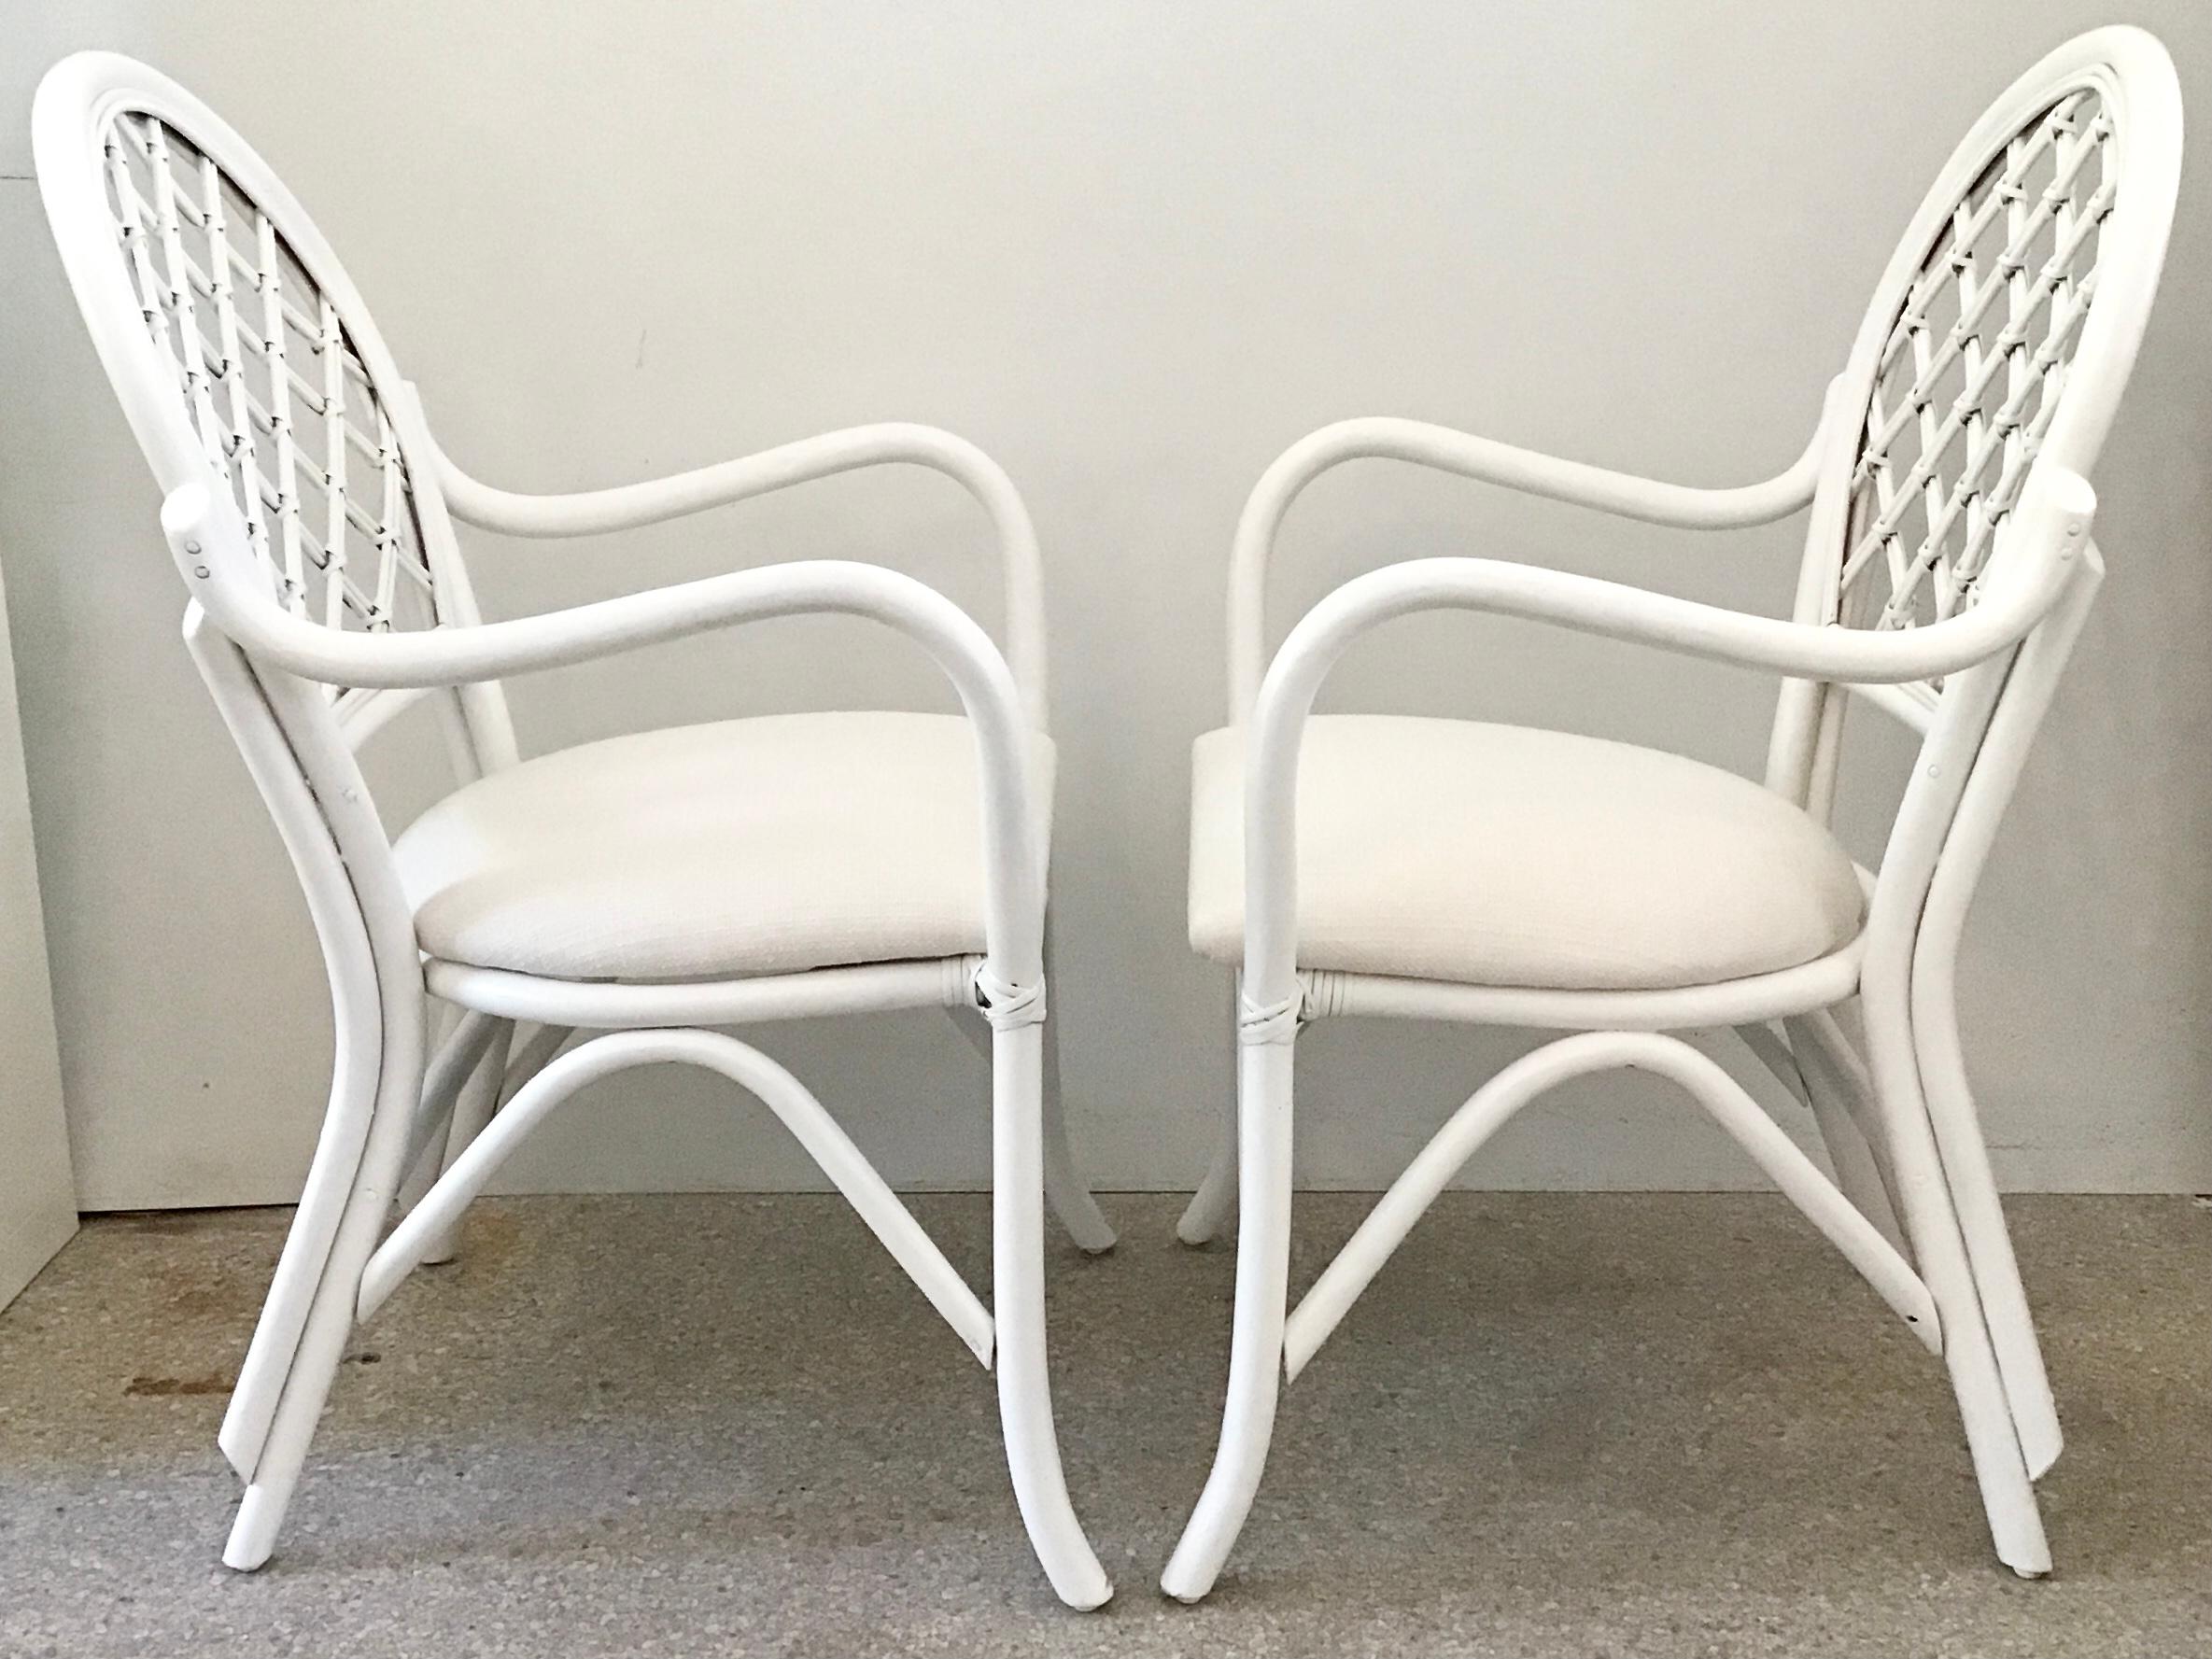 Mid-20th Century Ficks Reed Arm Chairs with New Todd Hase Upholstery, a Pair For Sale